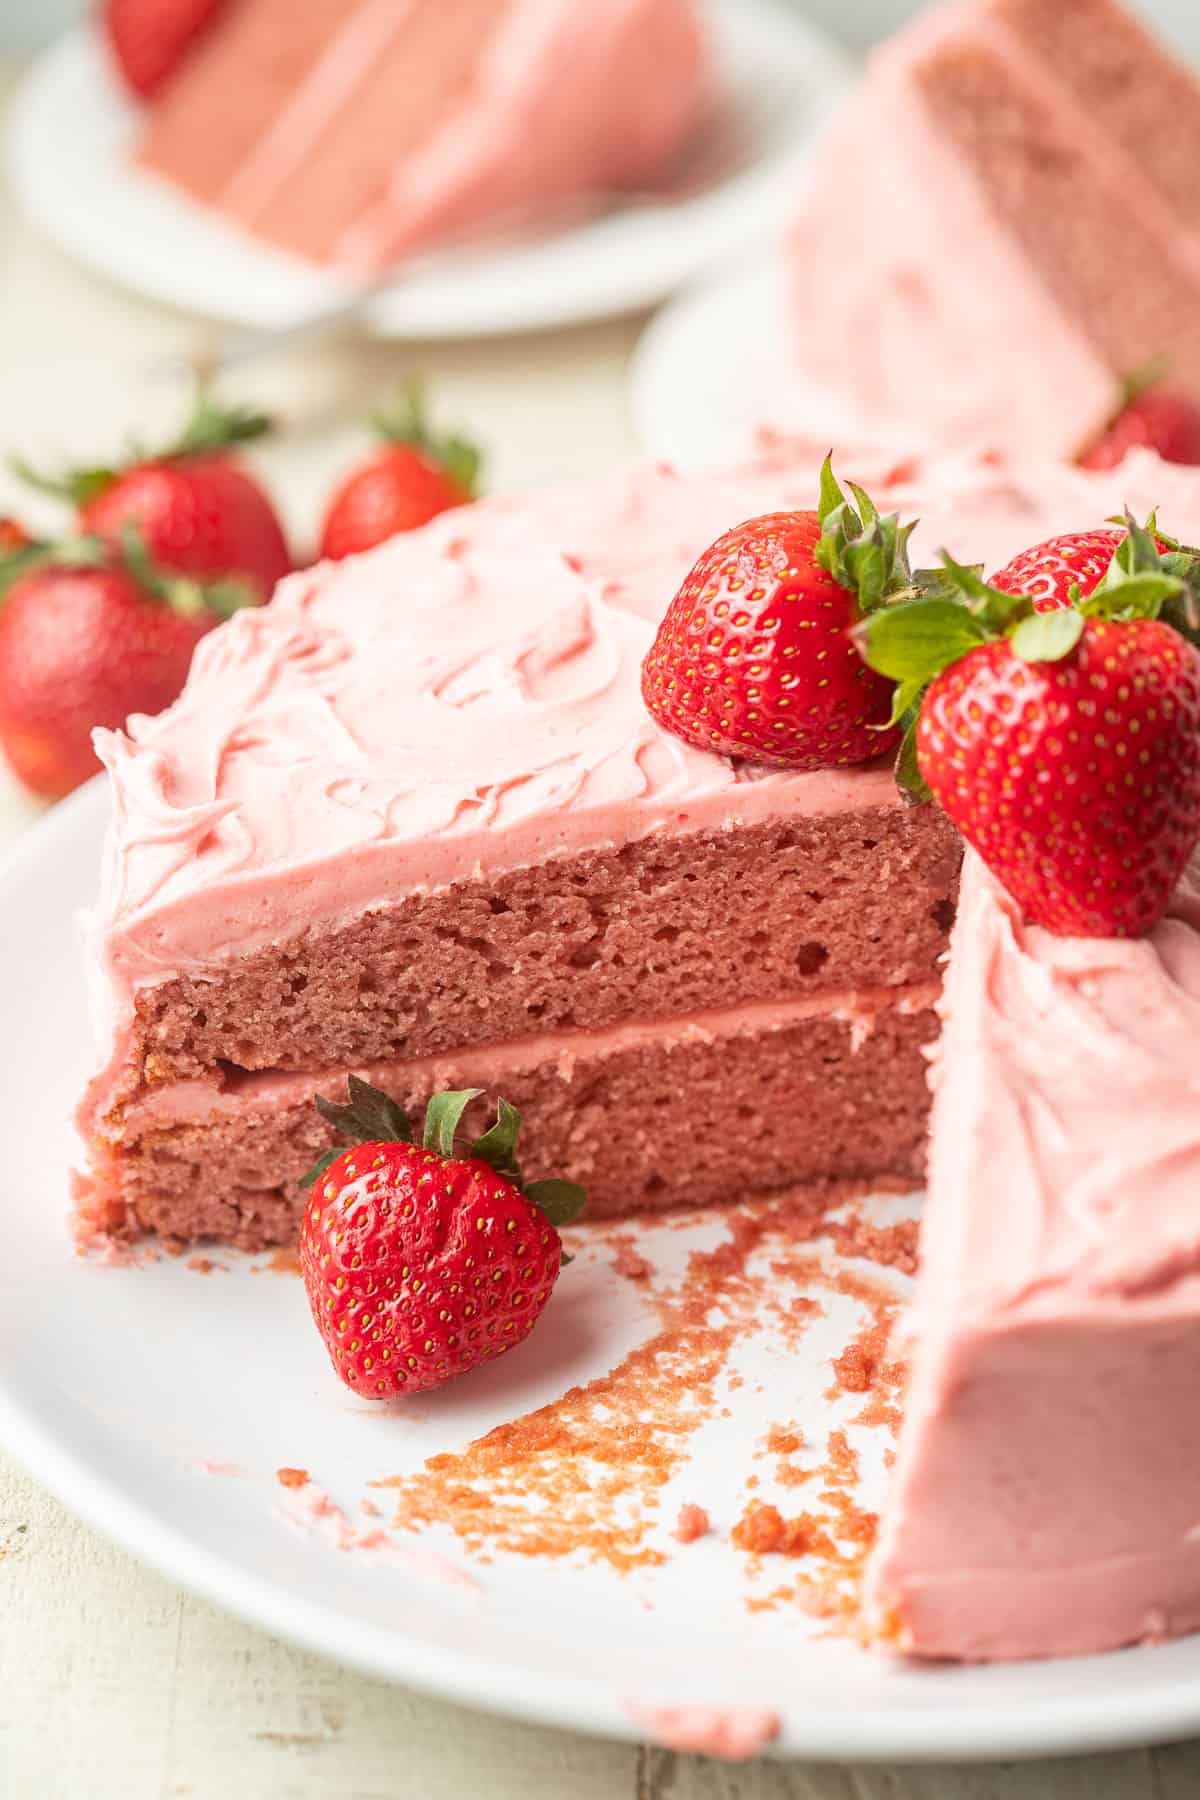 Vegan Strawberry Cake with a slice cut out and fresh strawberries on top.